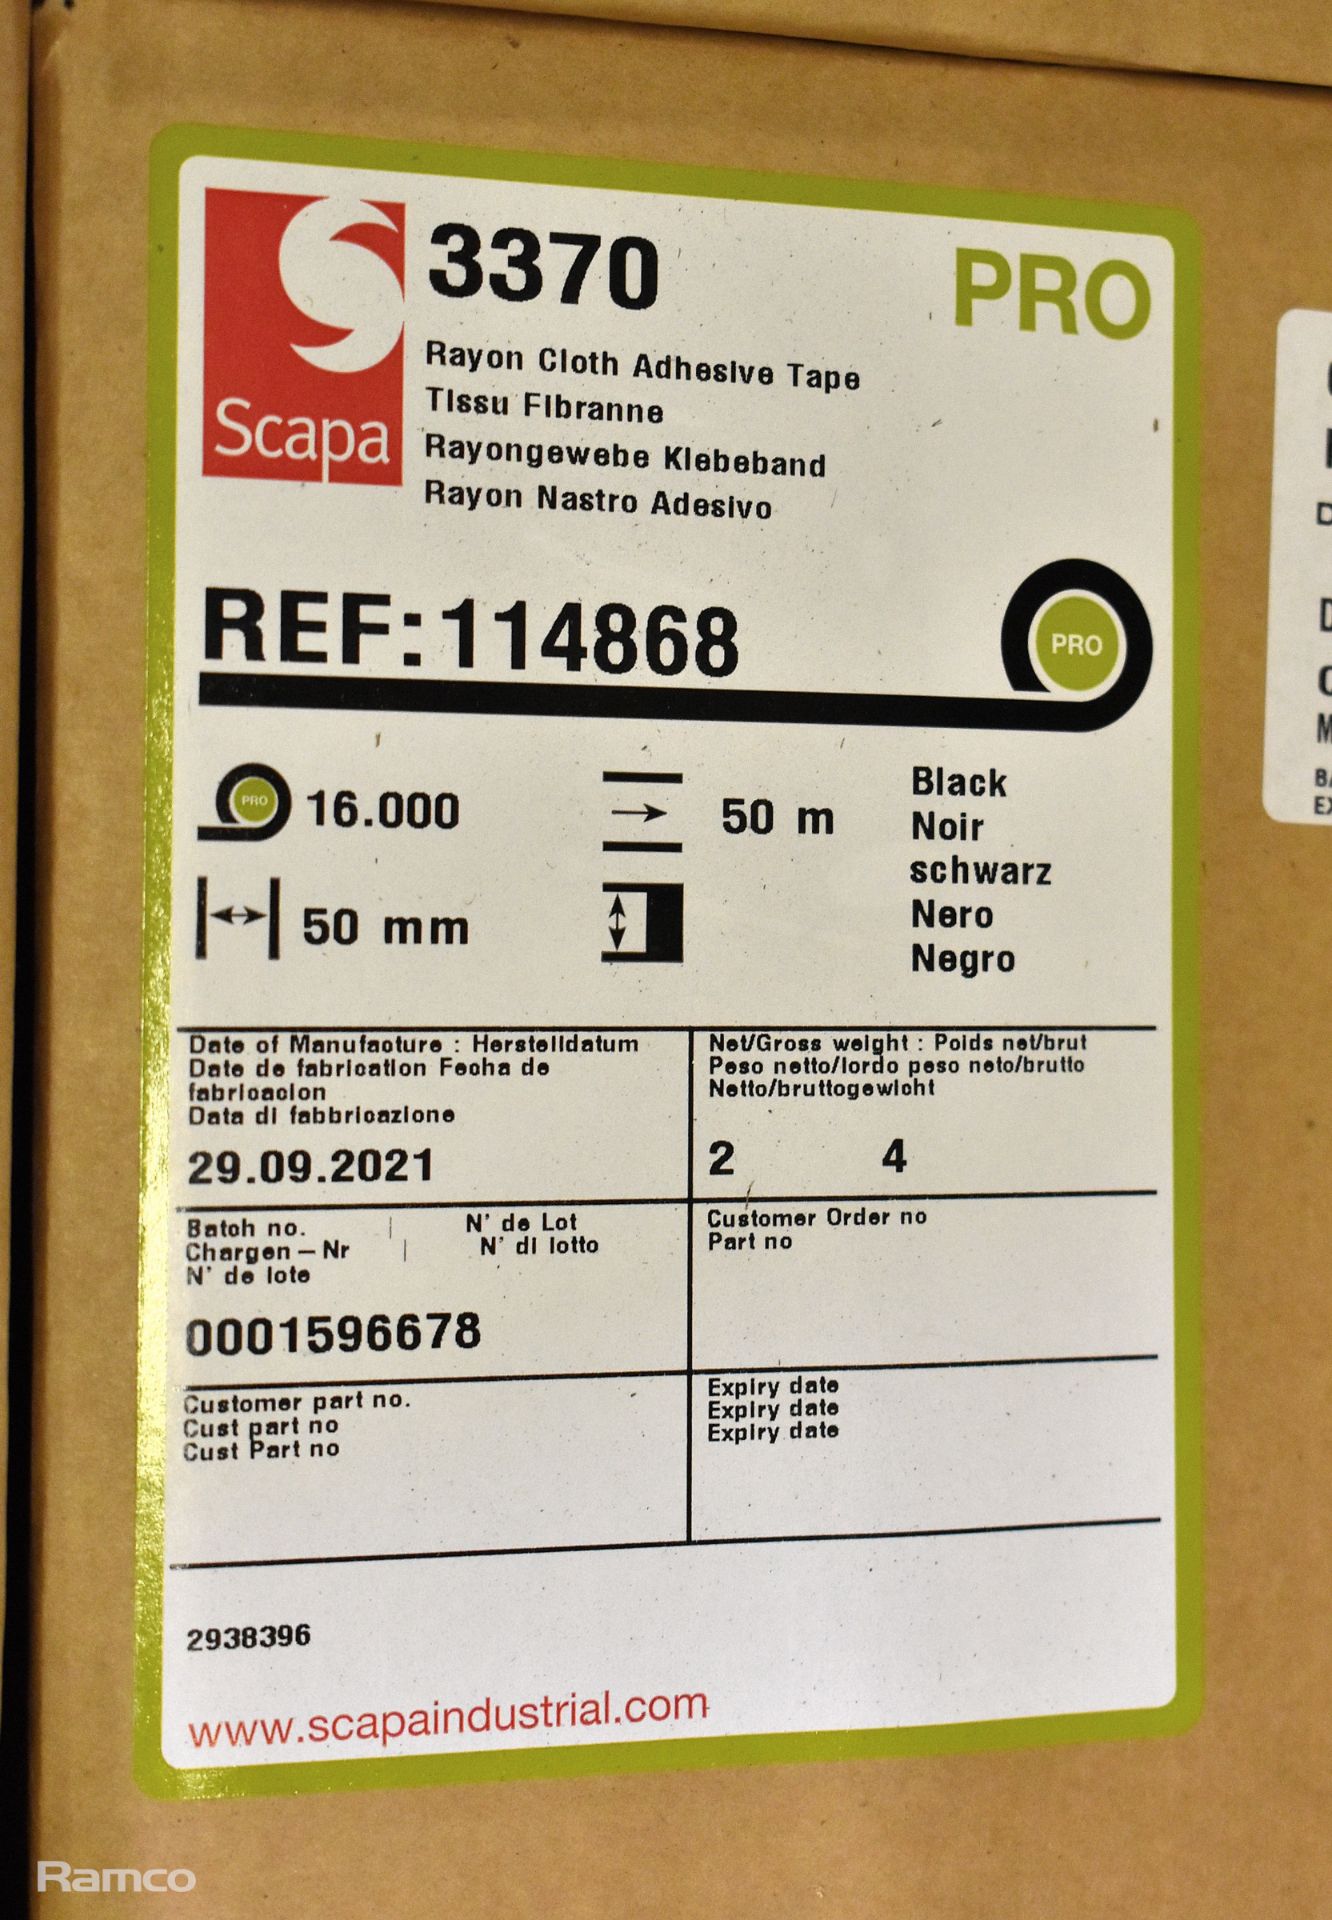 33x boxes of Scapa 3370 Rayon cloth fabric black adhesive tape - 50mm width - 50m length - Image 3 of 3